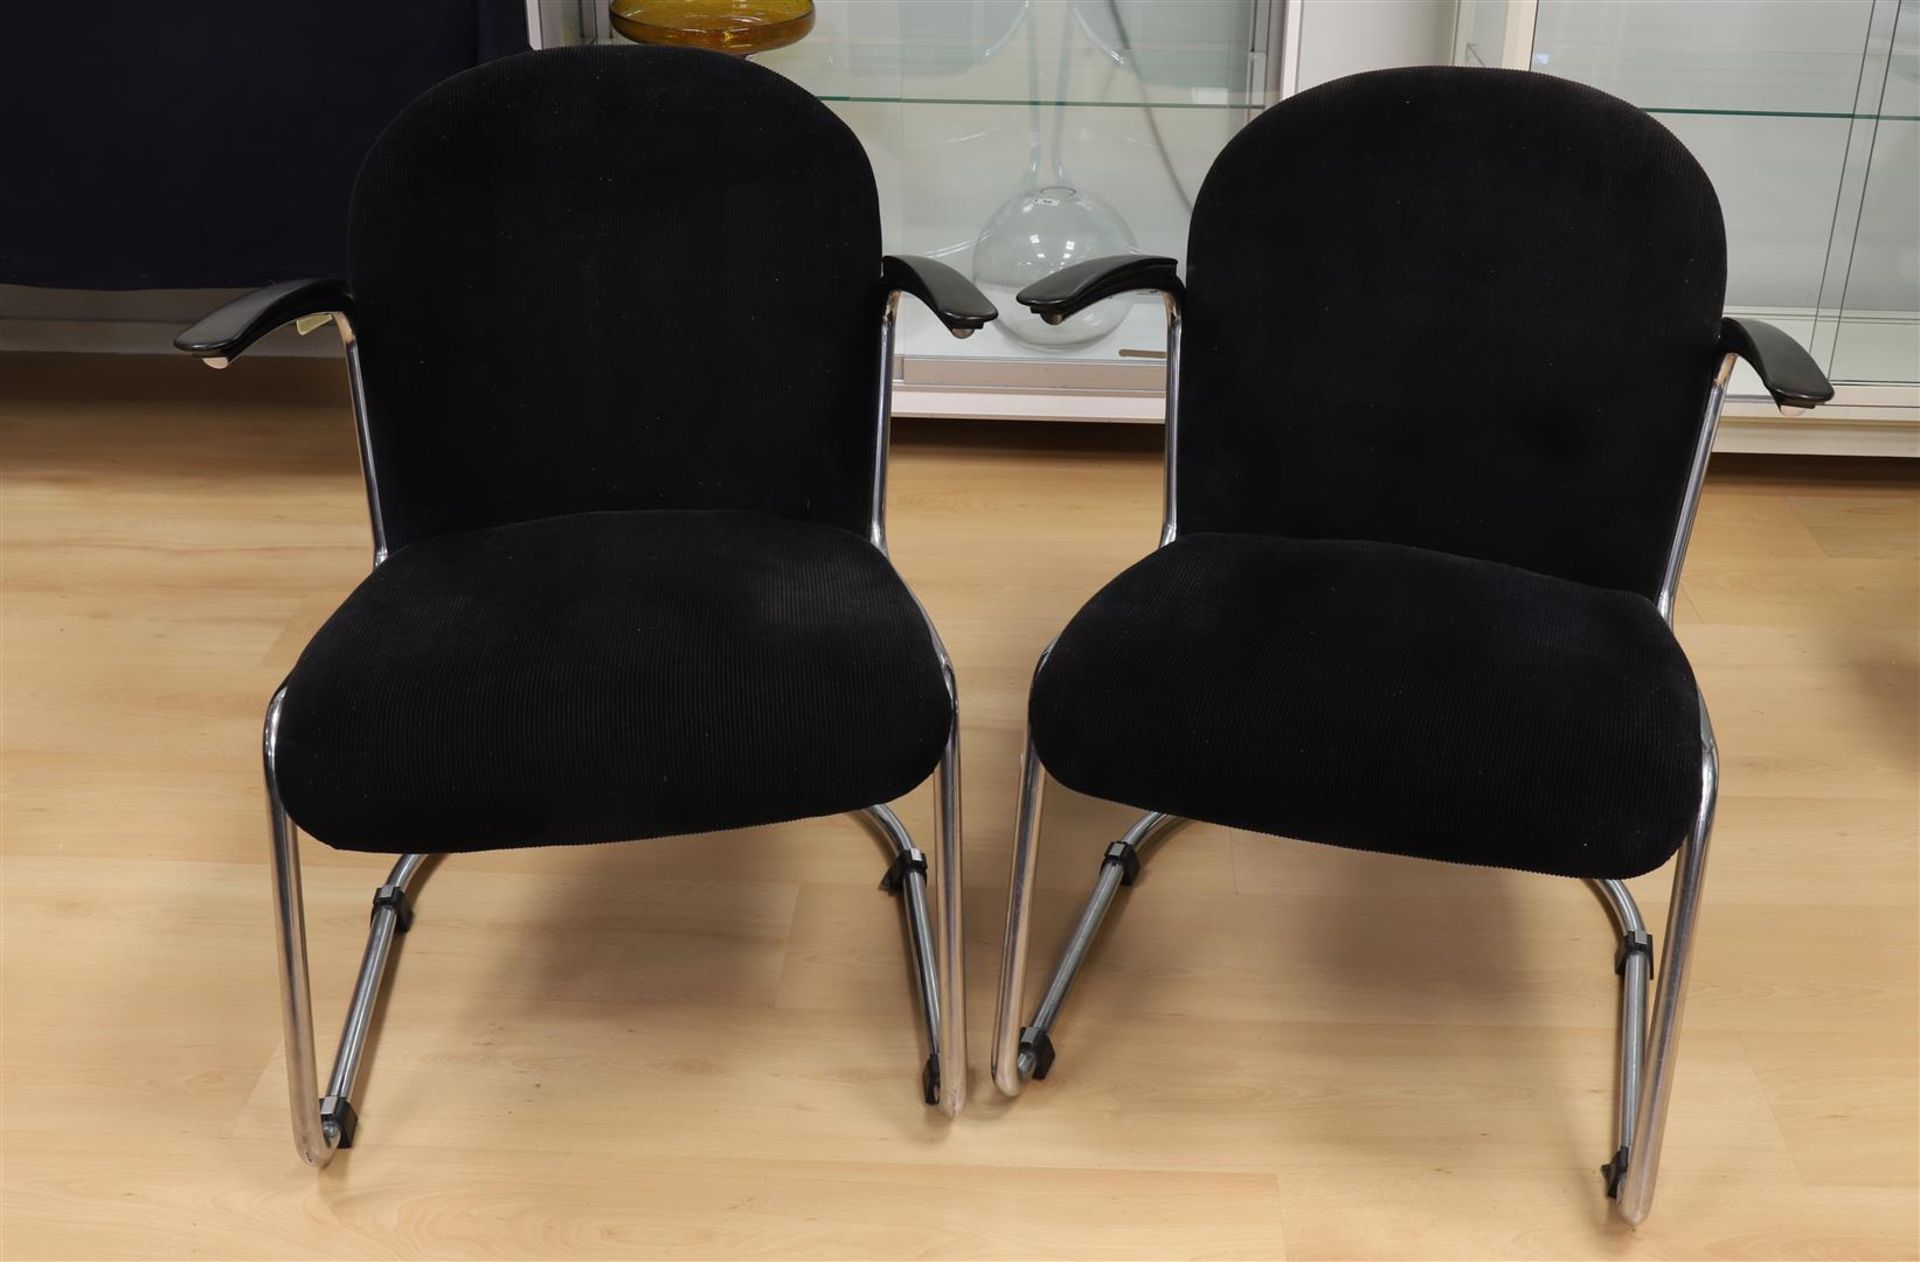 A pair of 413 RH cantilever tubular chairs, design: W.H. Gispen